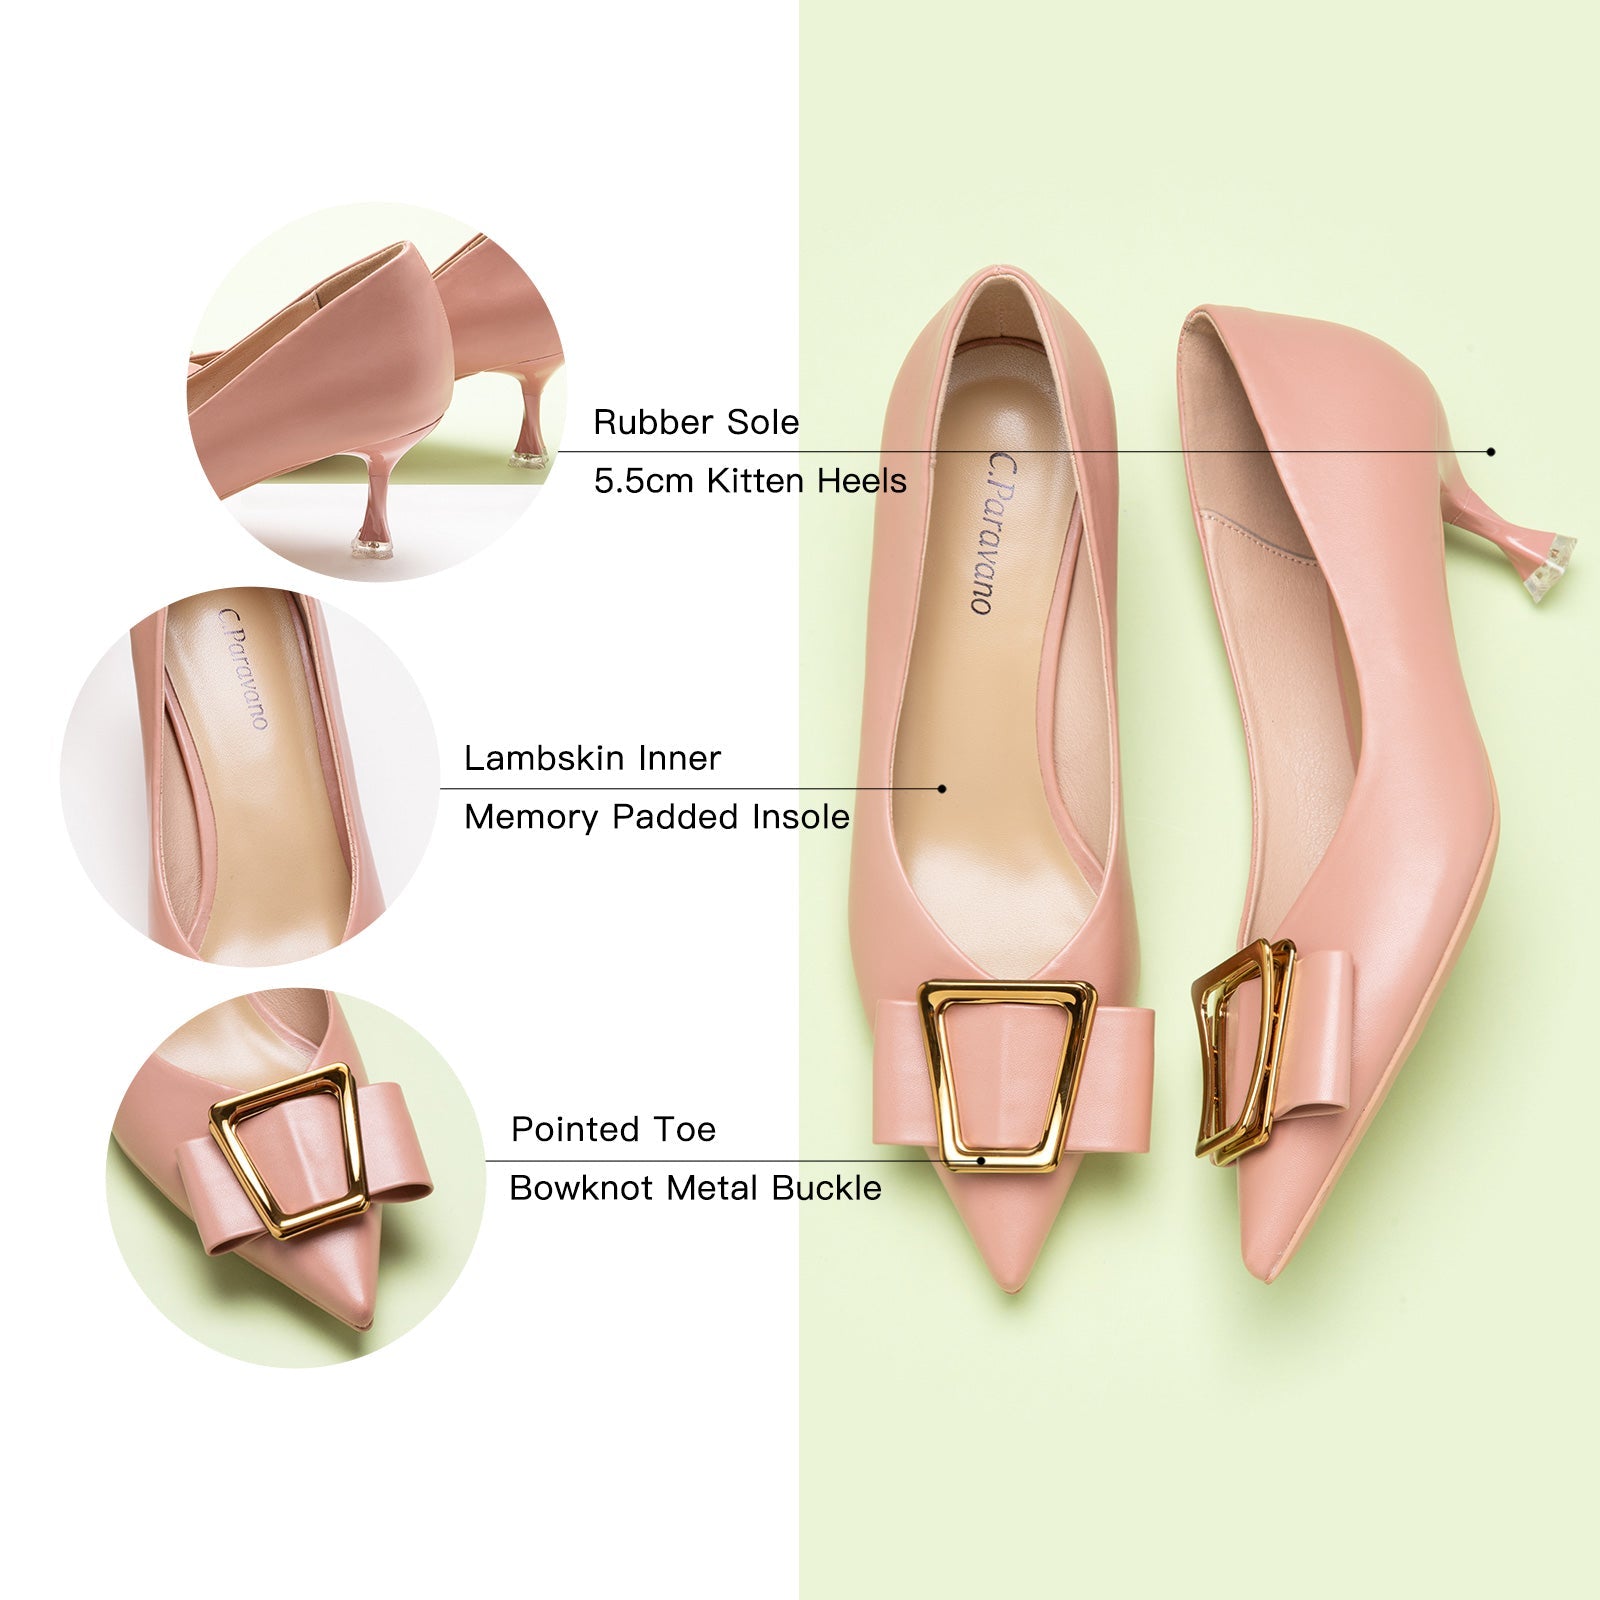 Geometric Pink Kitten Heel Pumps, offering a trendy and fashionable touch to your ensemble